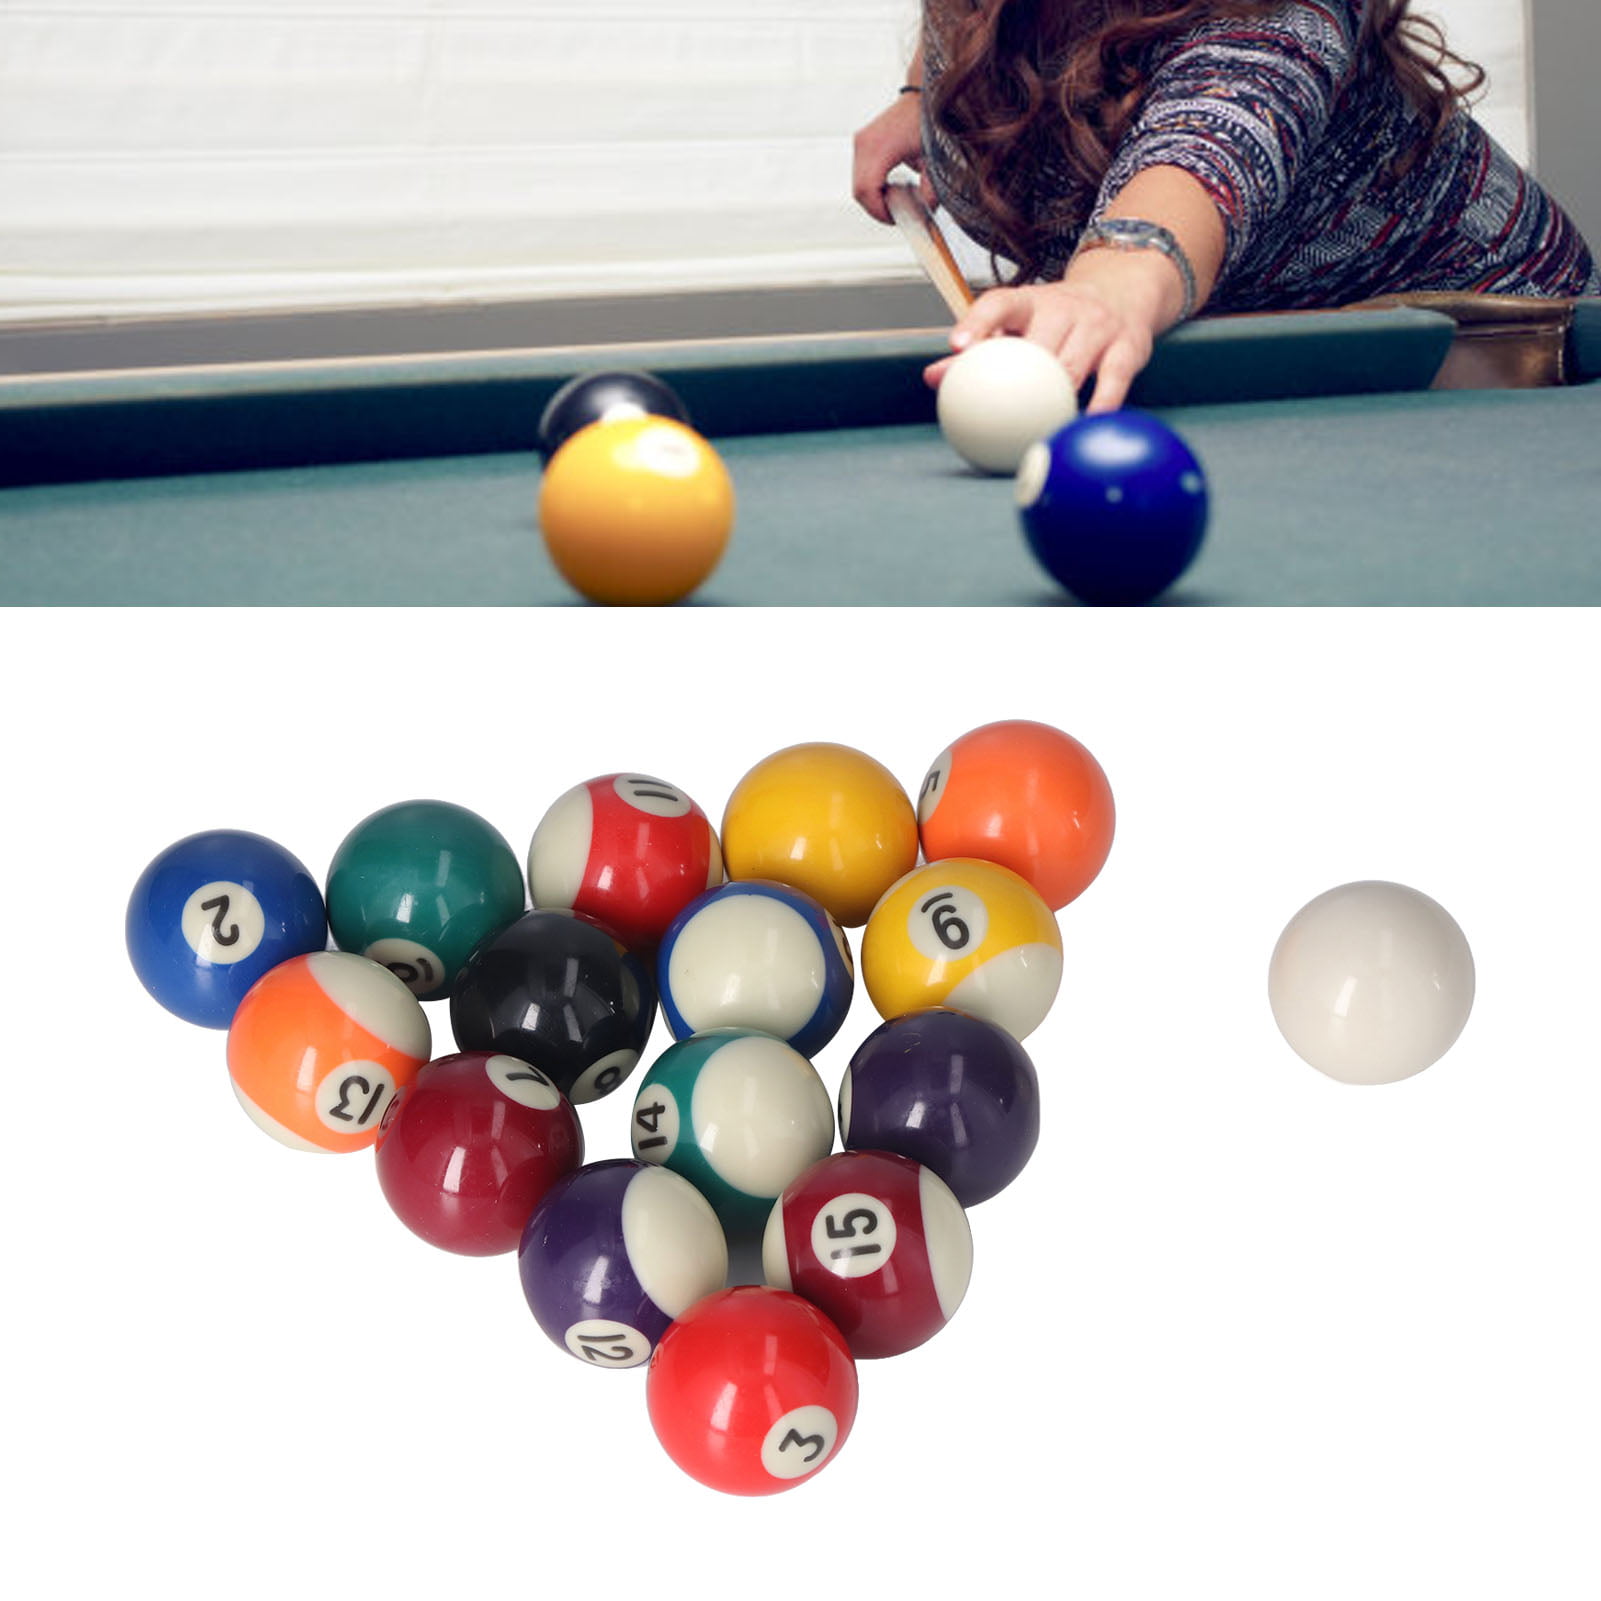  Upgrade Billiard Balls Set, 1.5 Inch Mini Size for 6 Feet Pool  Table 1-1/2 Pool Balls Set American Style, Complete 16 Balls : Sports &  Outdoors